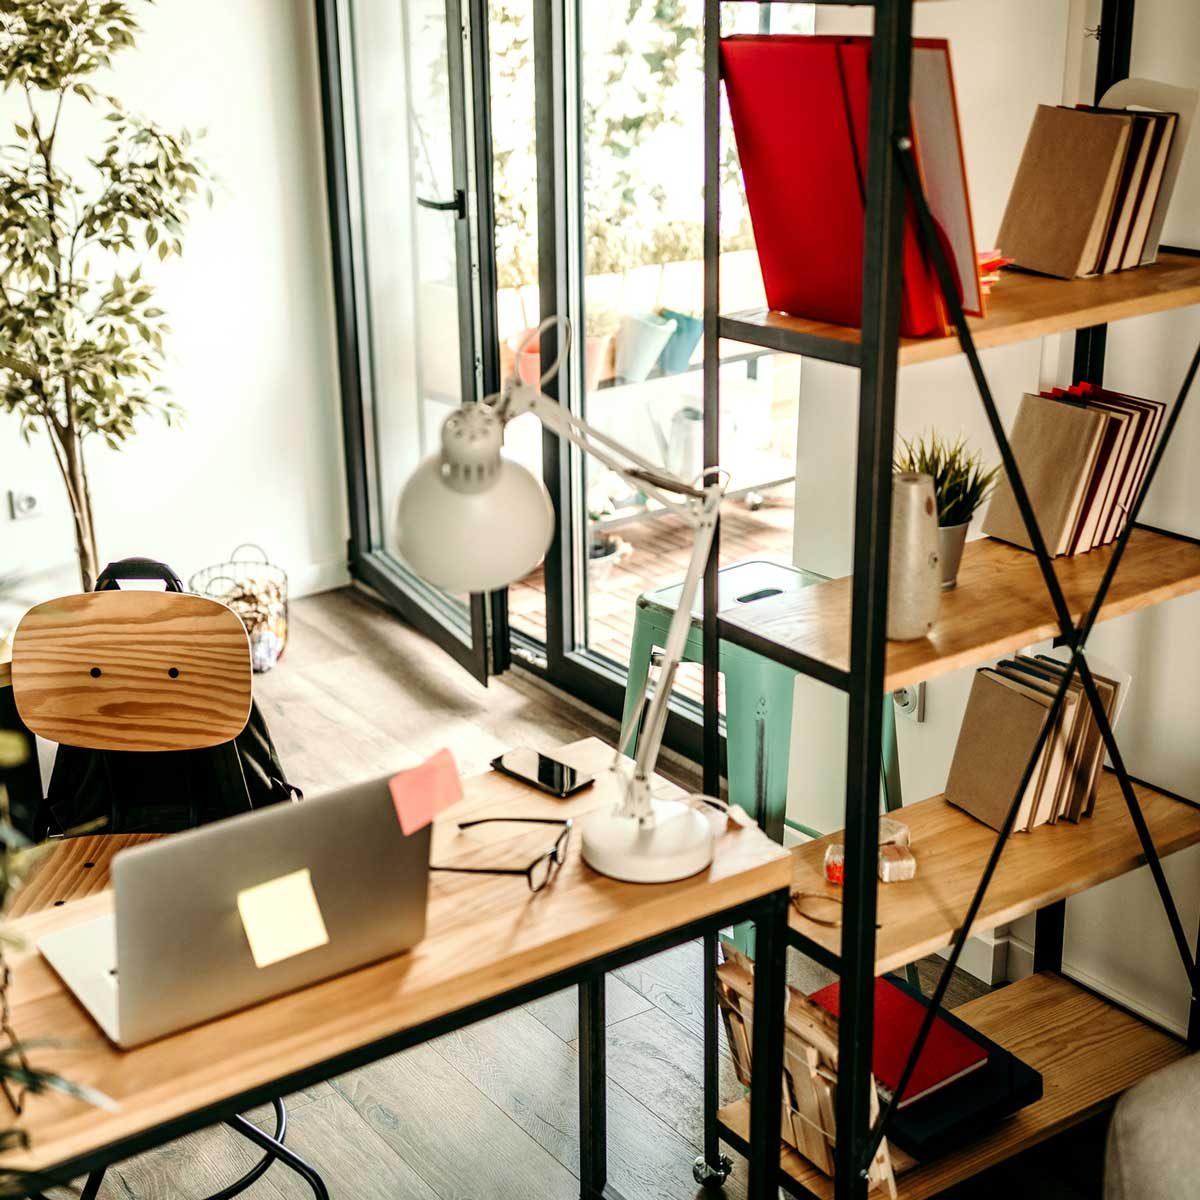 Bookshelf in a small office